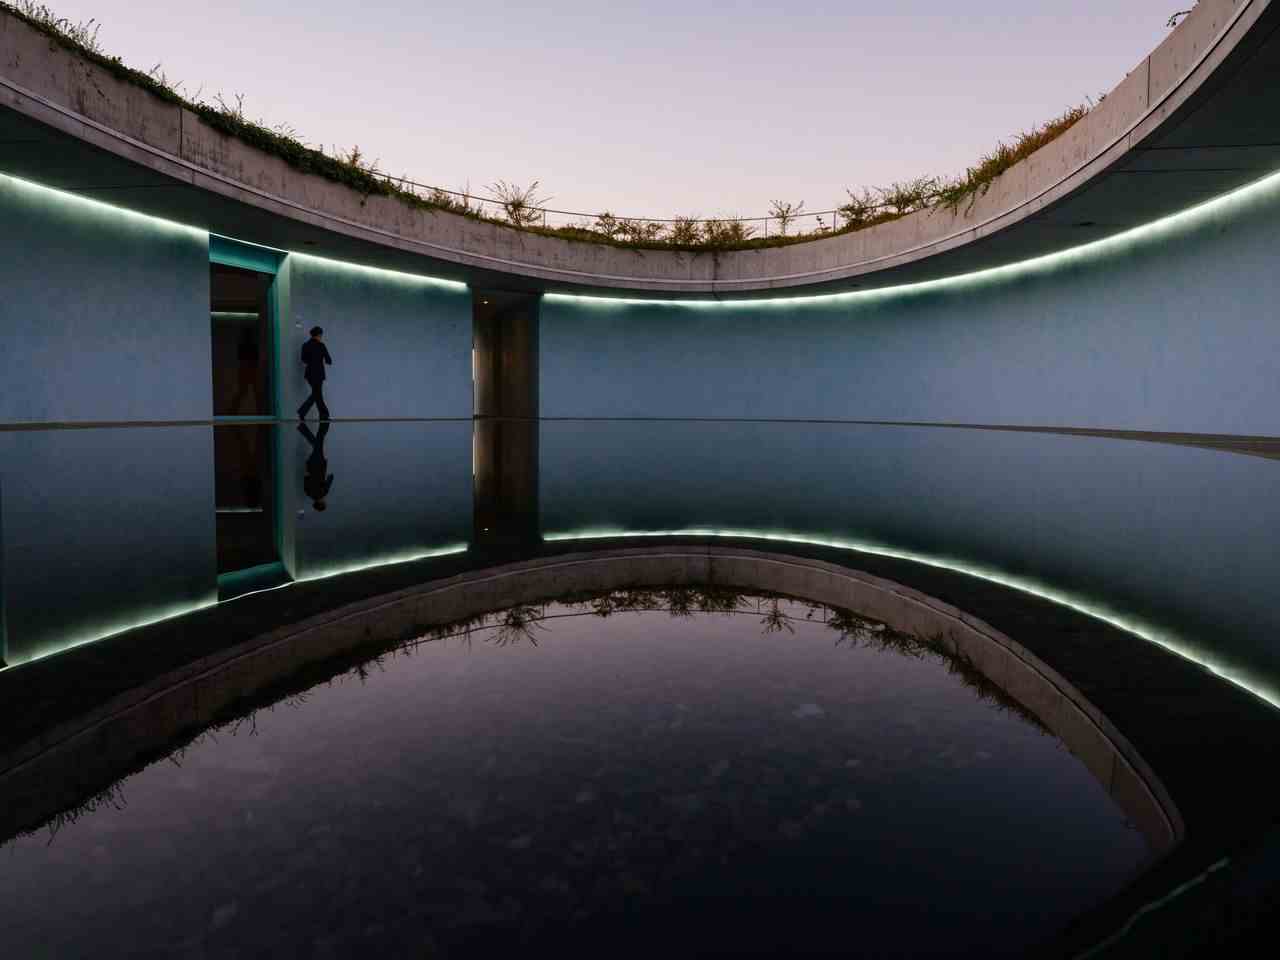 The "Oval" at Benesse House Museum in Naoshima by Tadao Ando, another Pritzker Prize-winning architect.